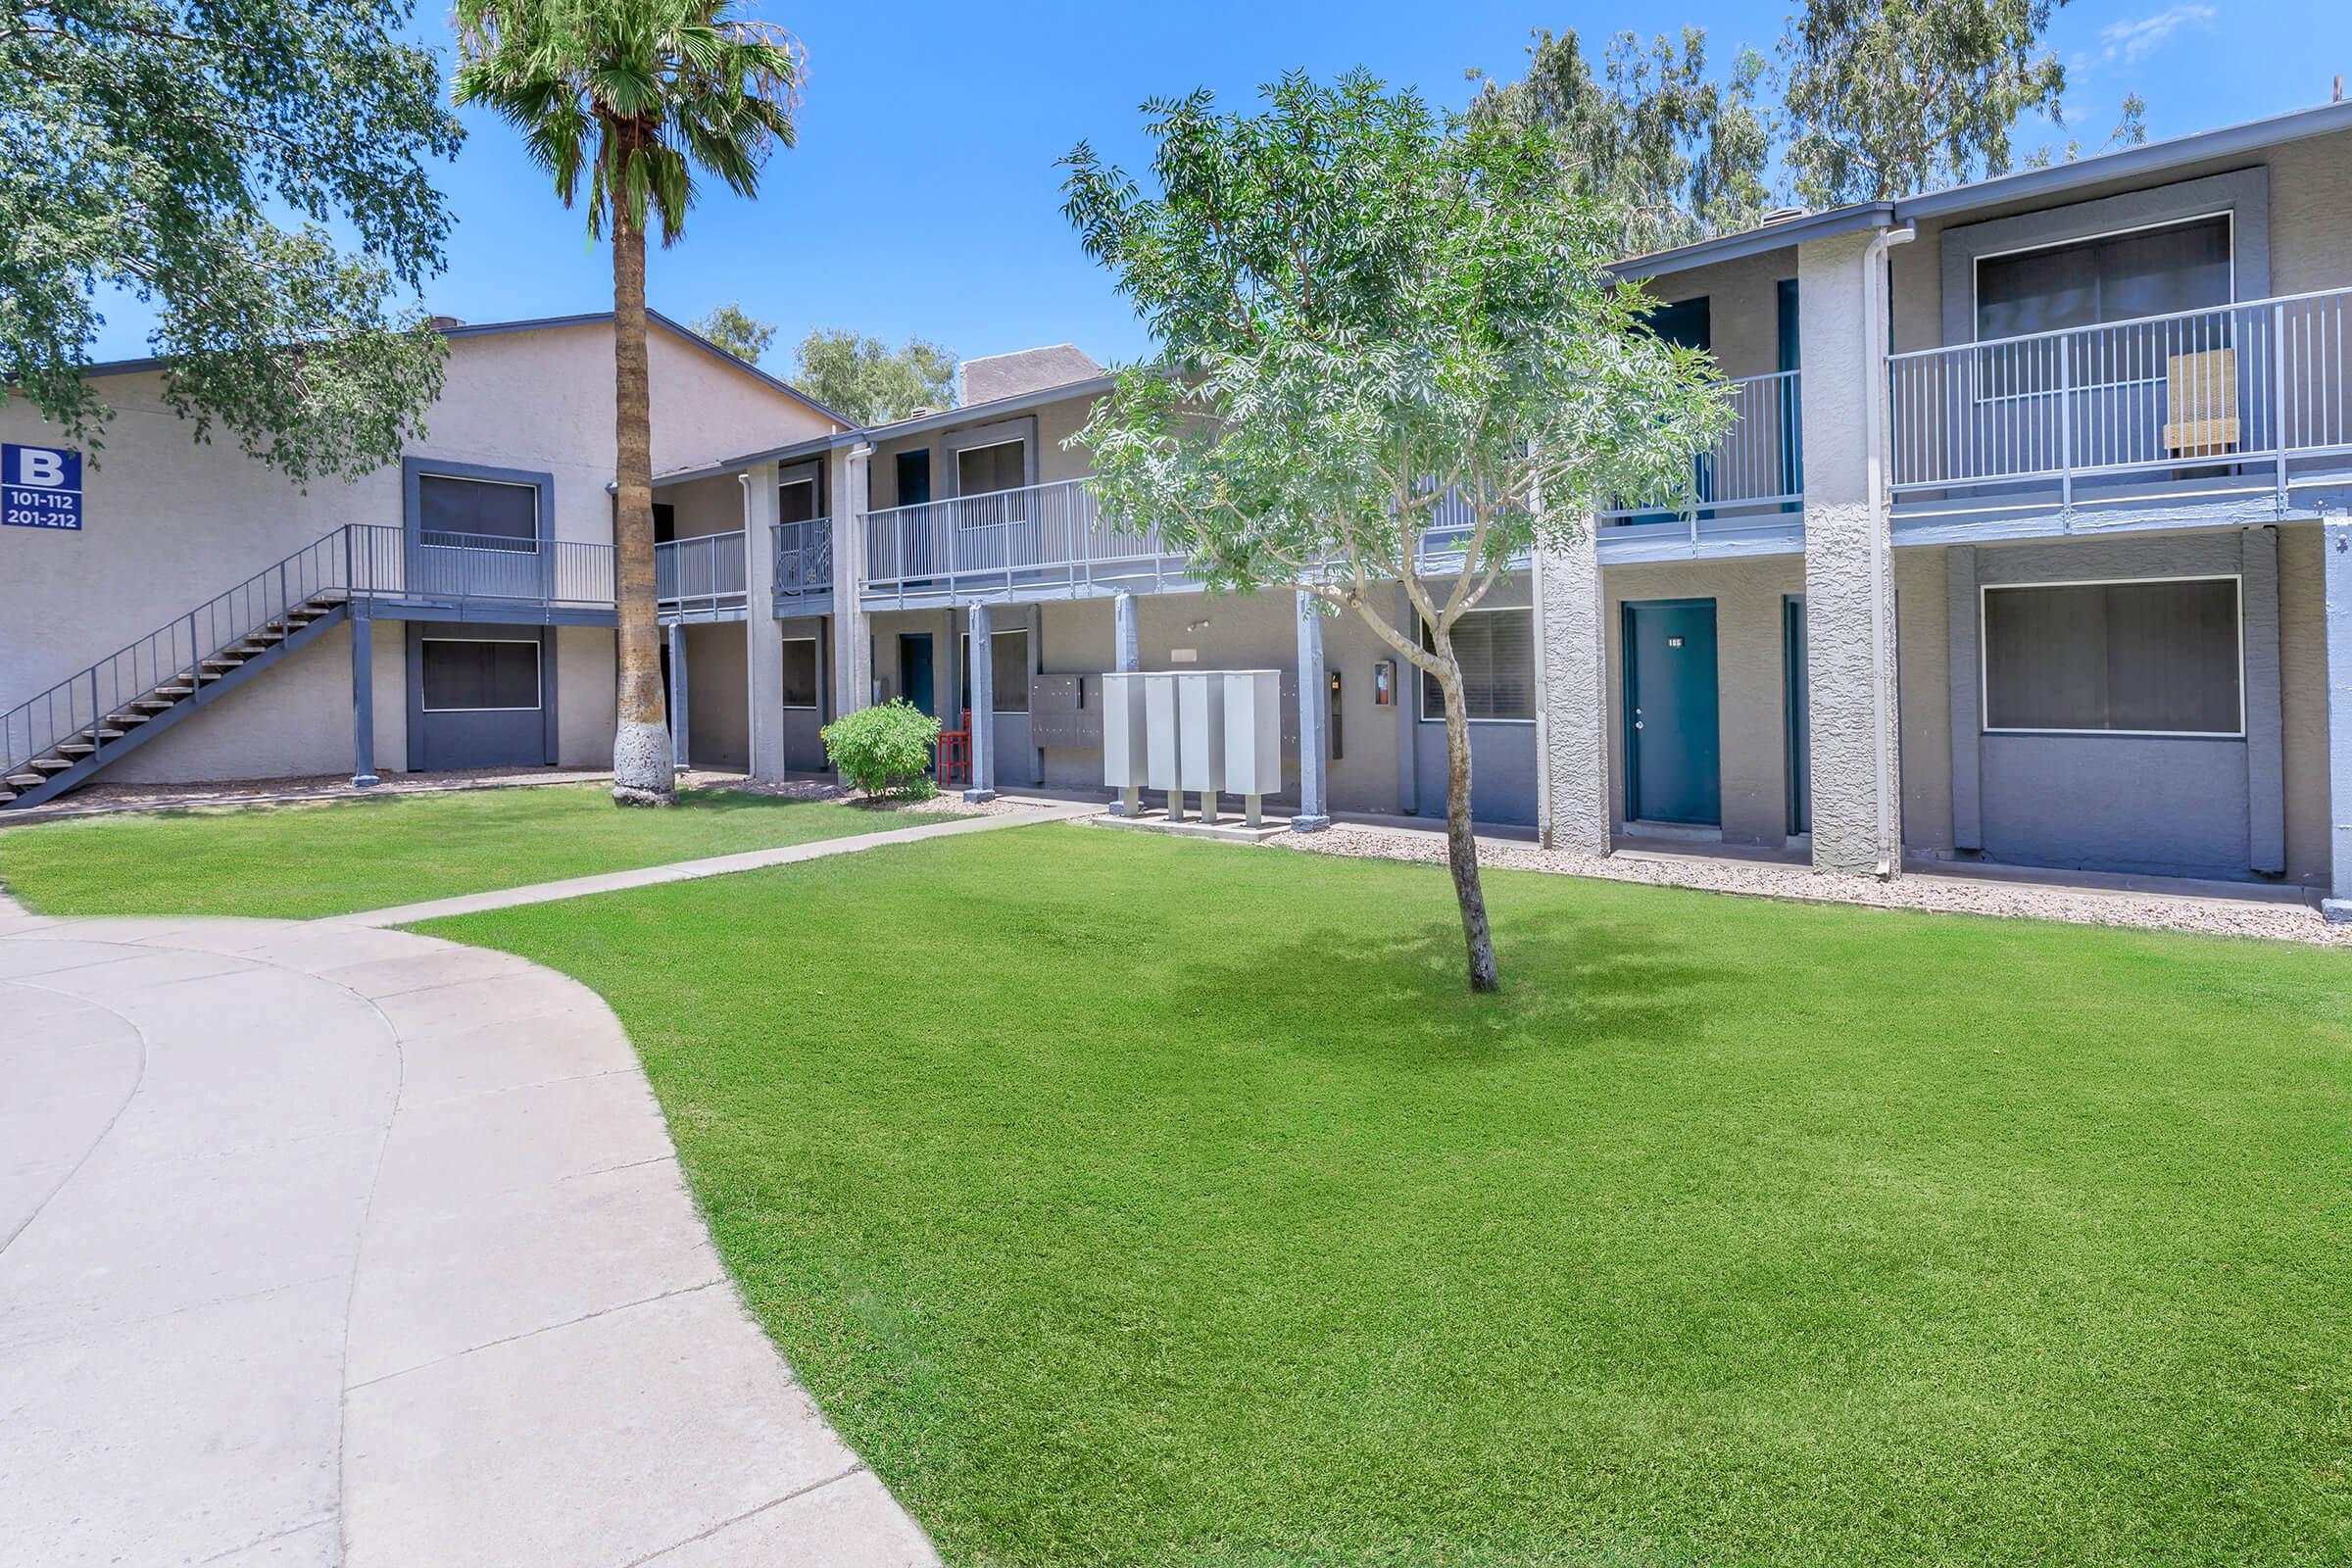 Rise on Cave Creek's two-story apartment building with large grassy lot and trees in front 